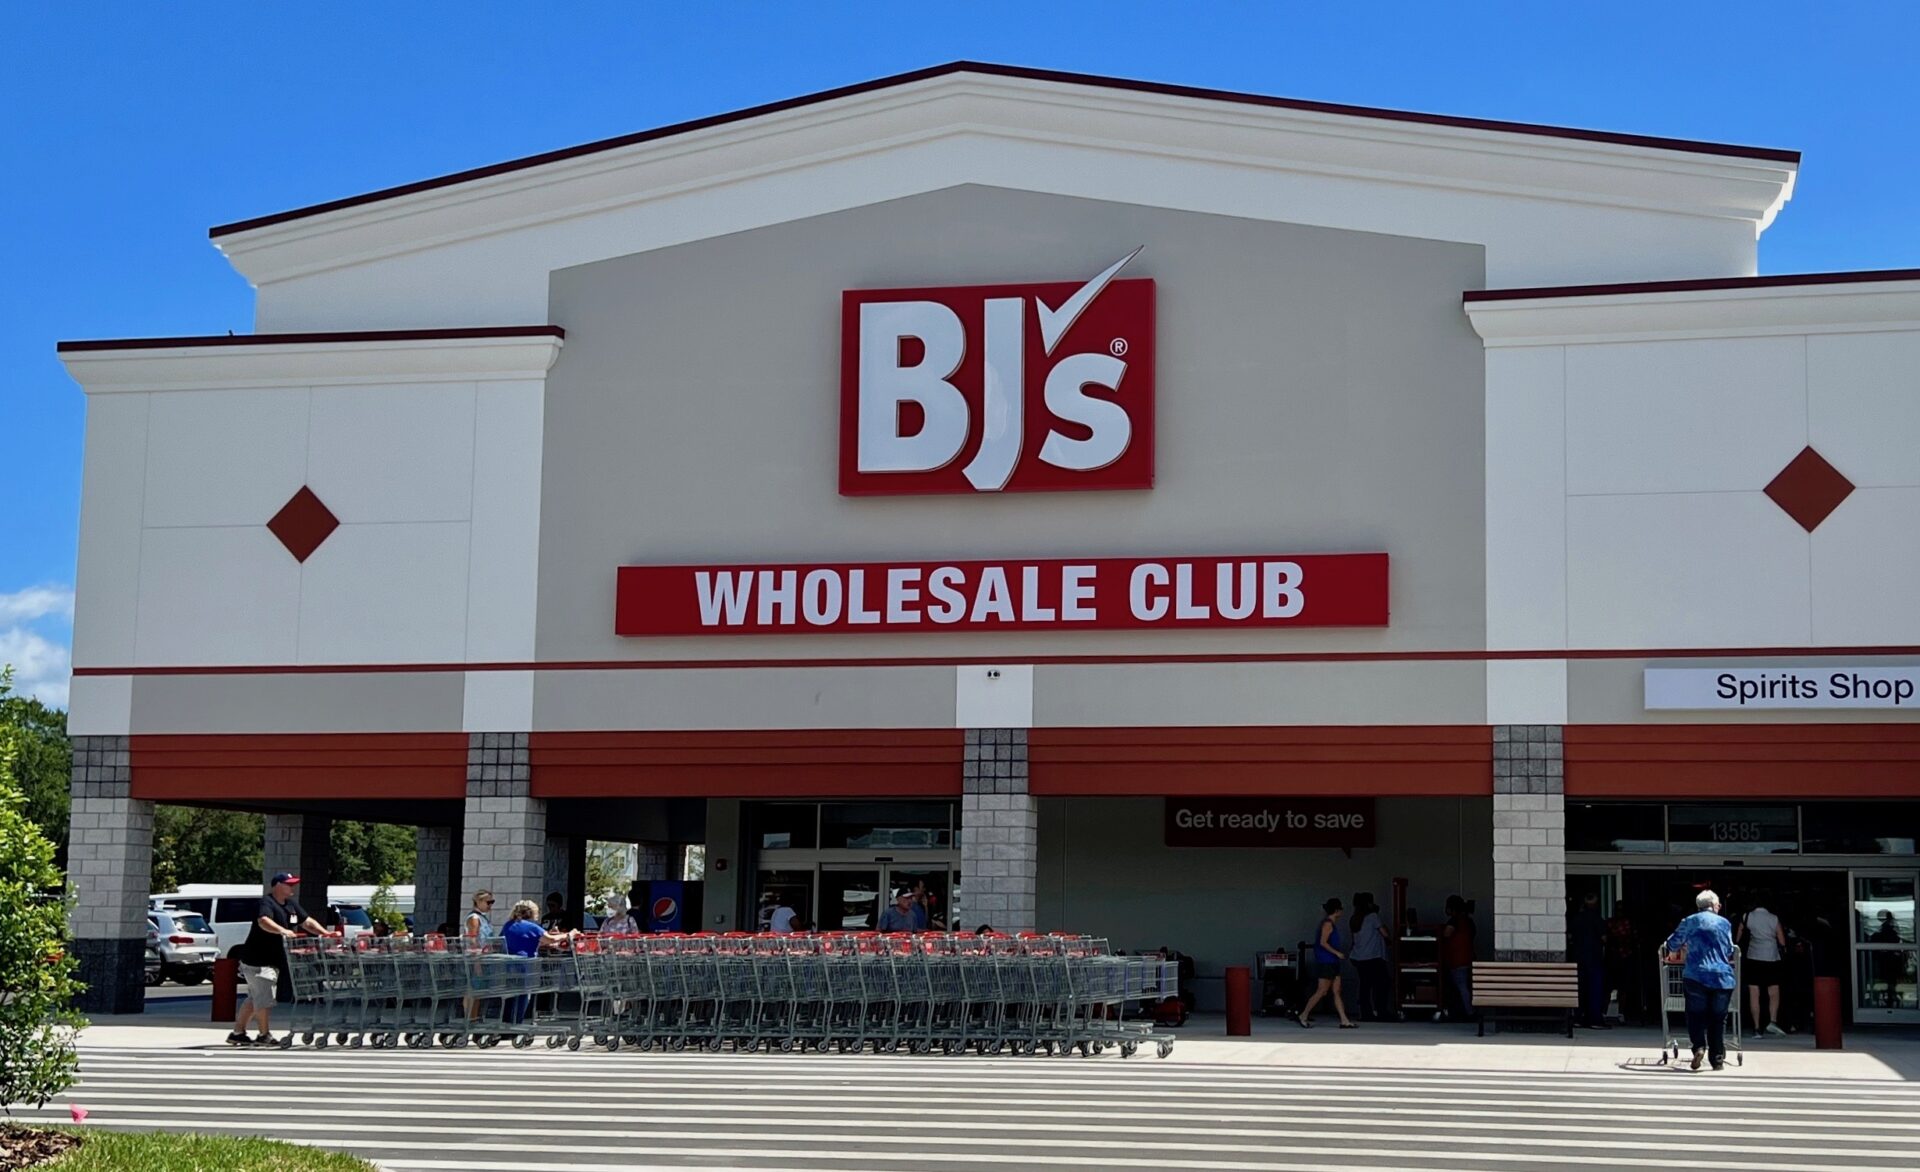 https://www.villages-news.com/wp-content/uploads/2022/05/BJs-Wholesale-Club-officially-opened-its-doors-on-Friday.jpg